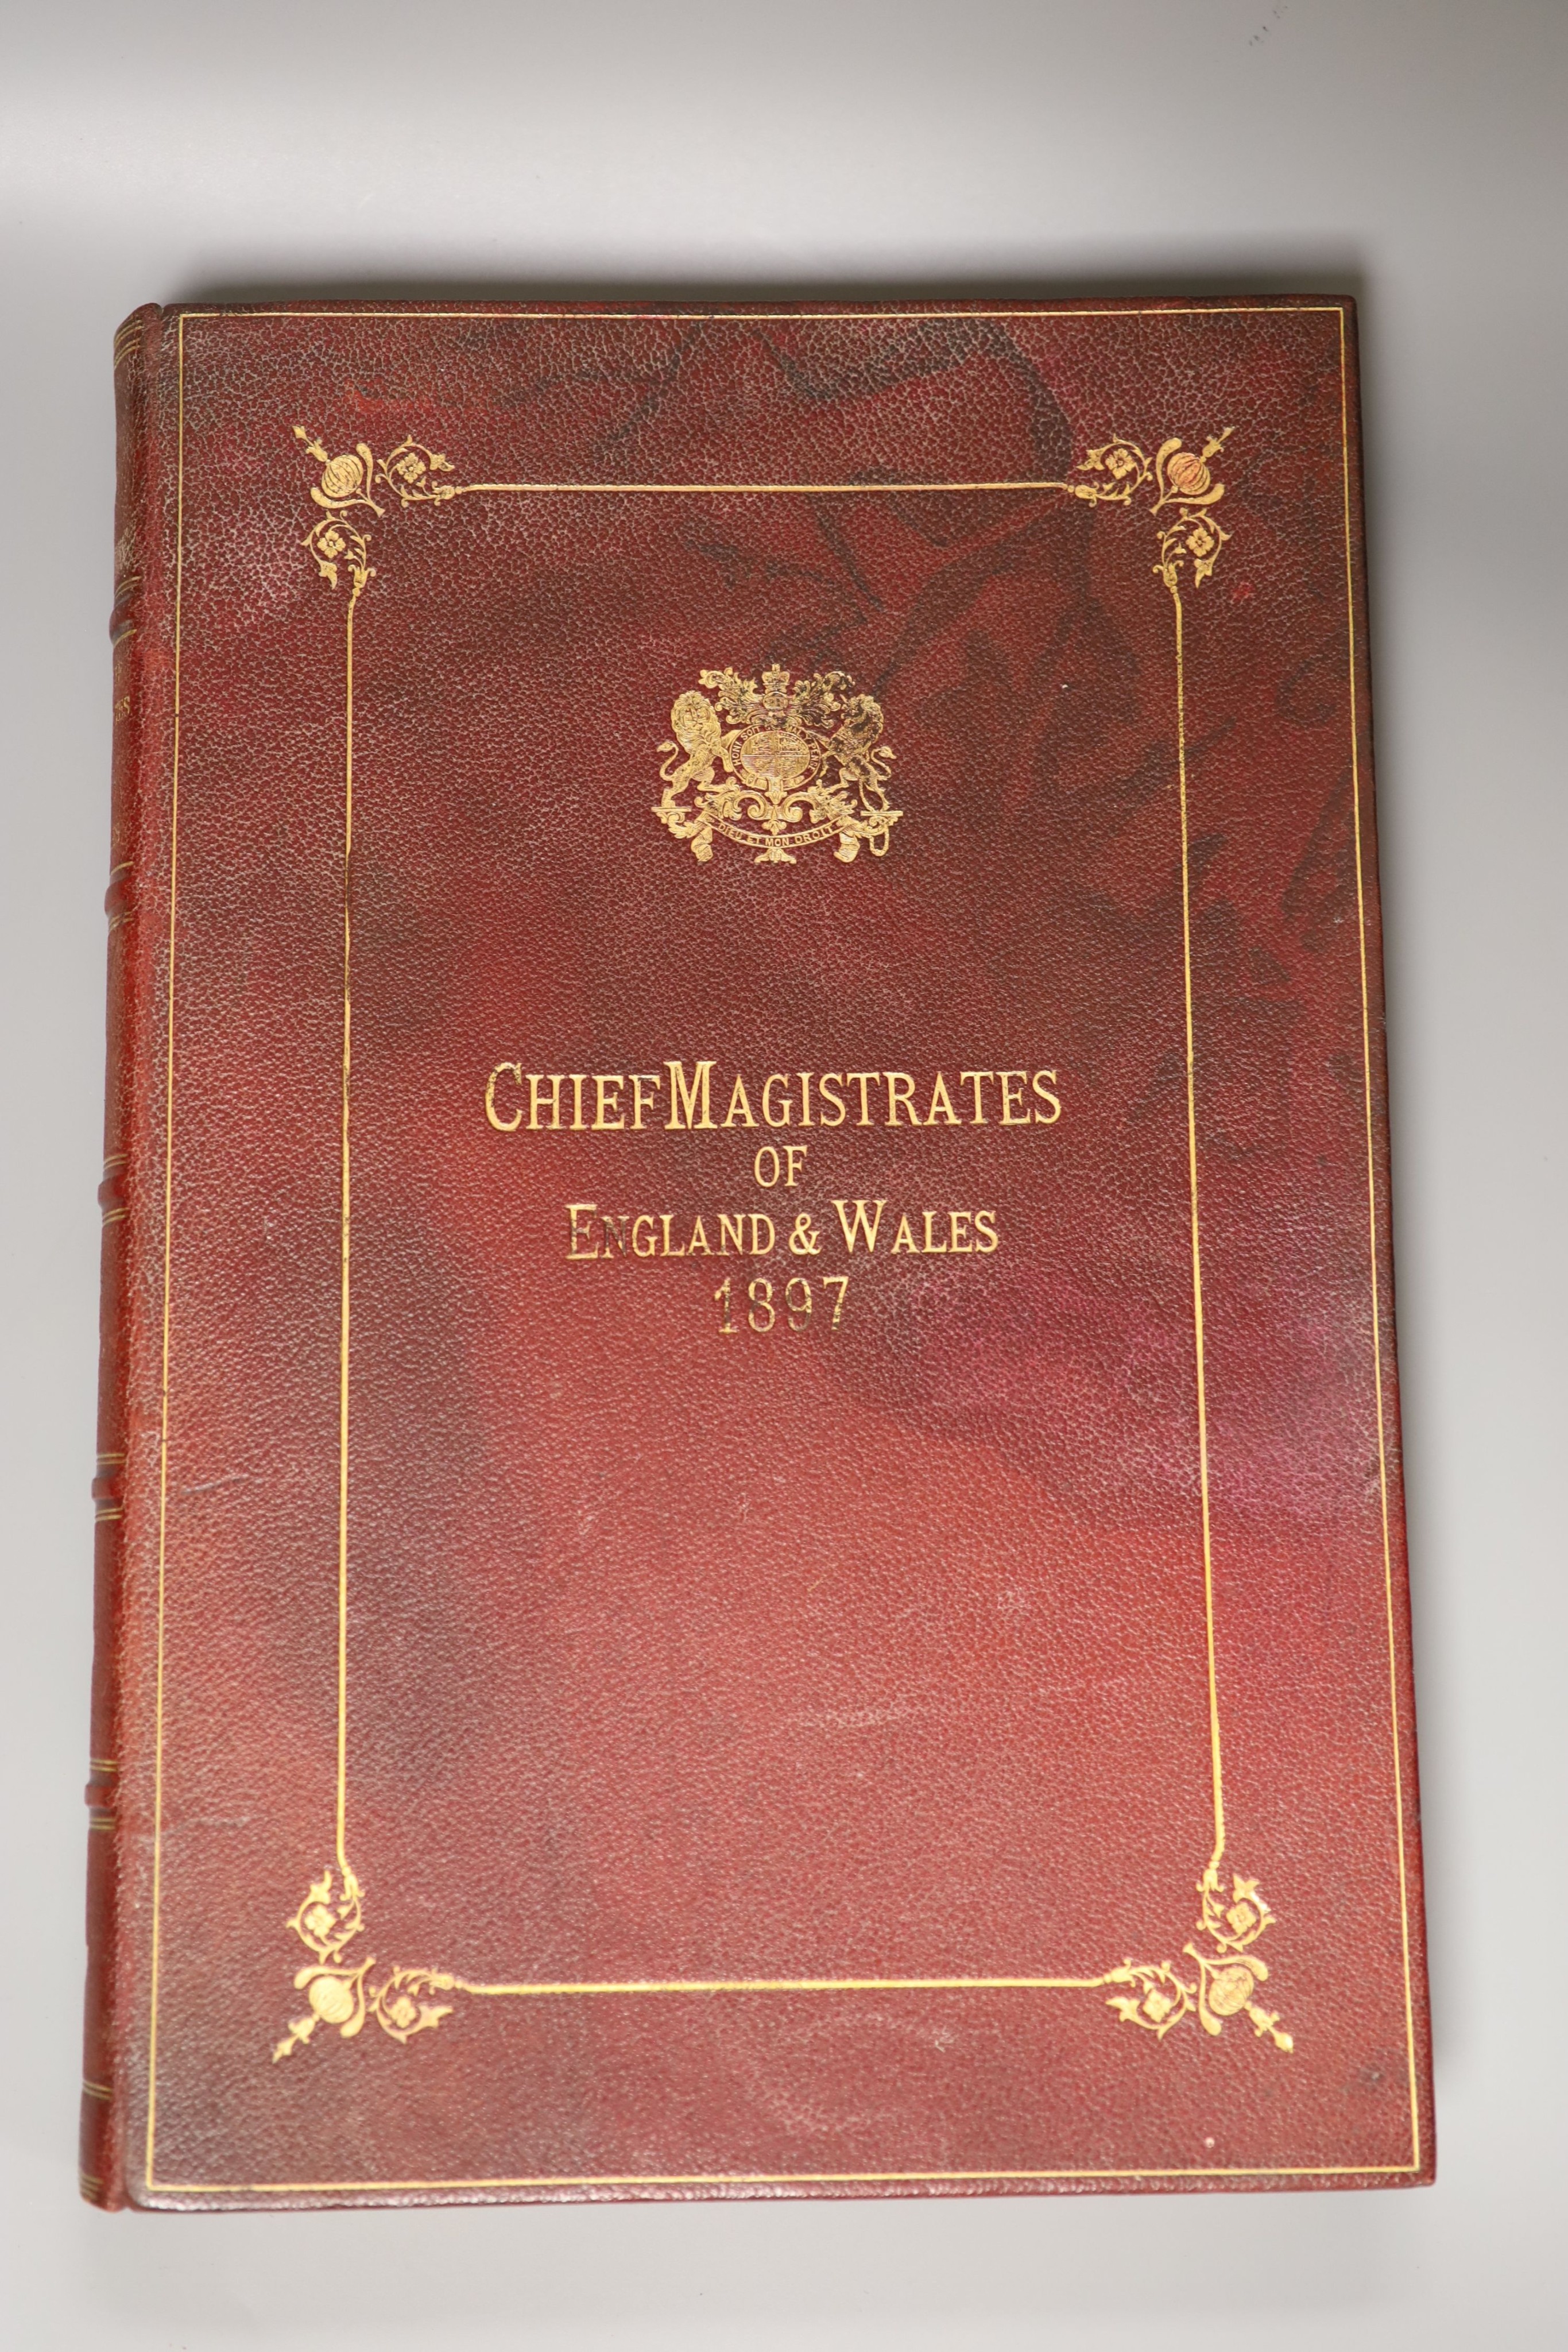 Magistrates - The Chief Magistrates of England and Wales, folio, red morocco gilt, London, 1897 and Hooper, William Eden - The Stock Exchange in the Year 1900, a souvenir, folio, vellum gilt, later plates and text spotte